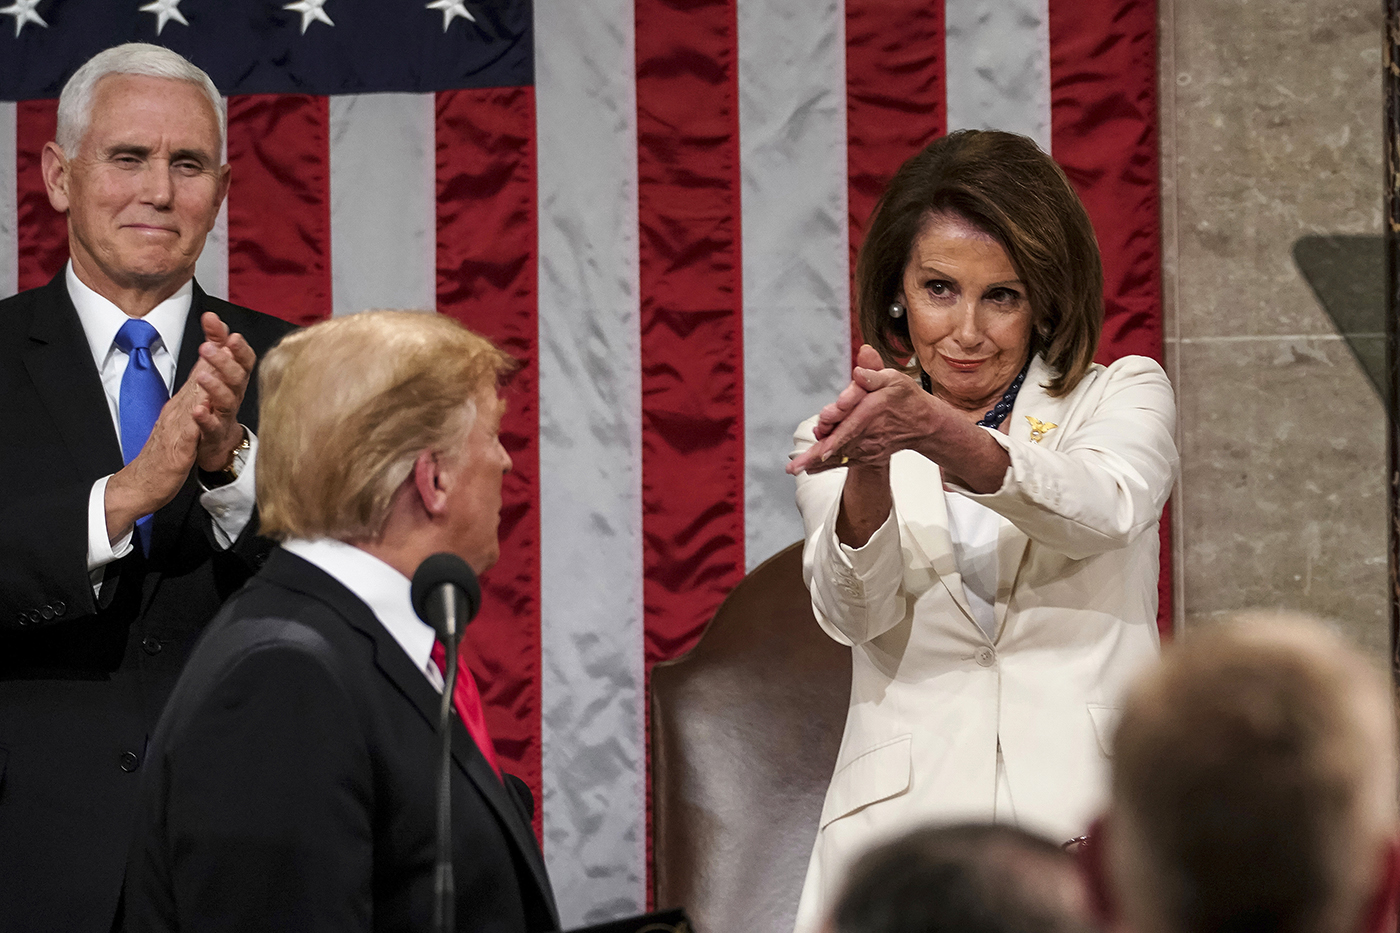 Nancy Pelosi claps in the direction of President Trump